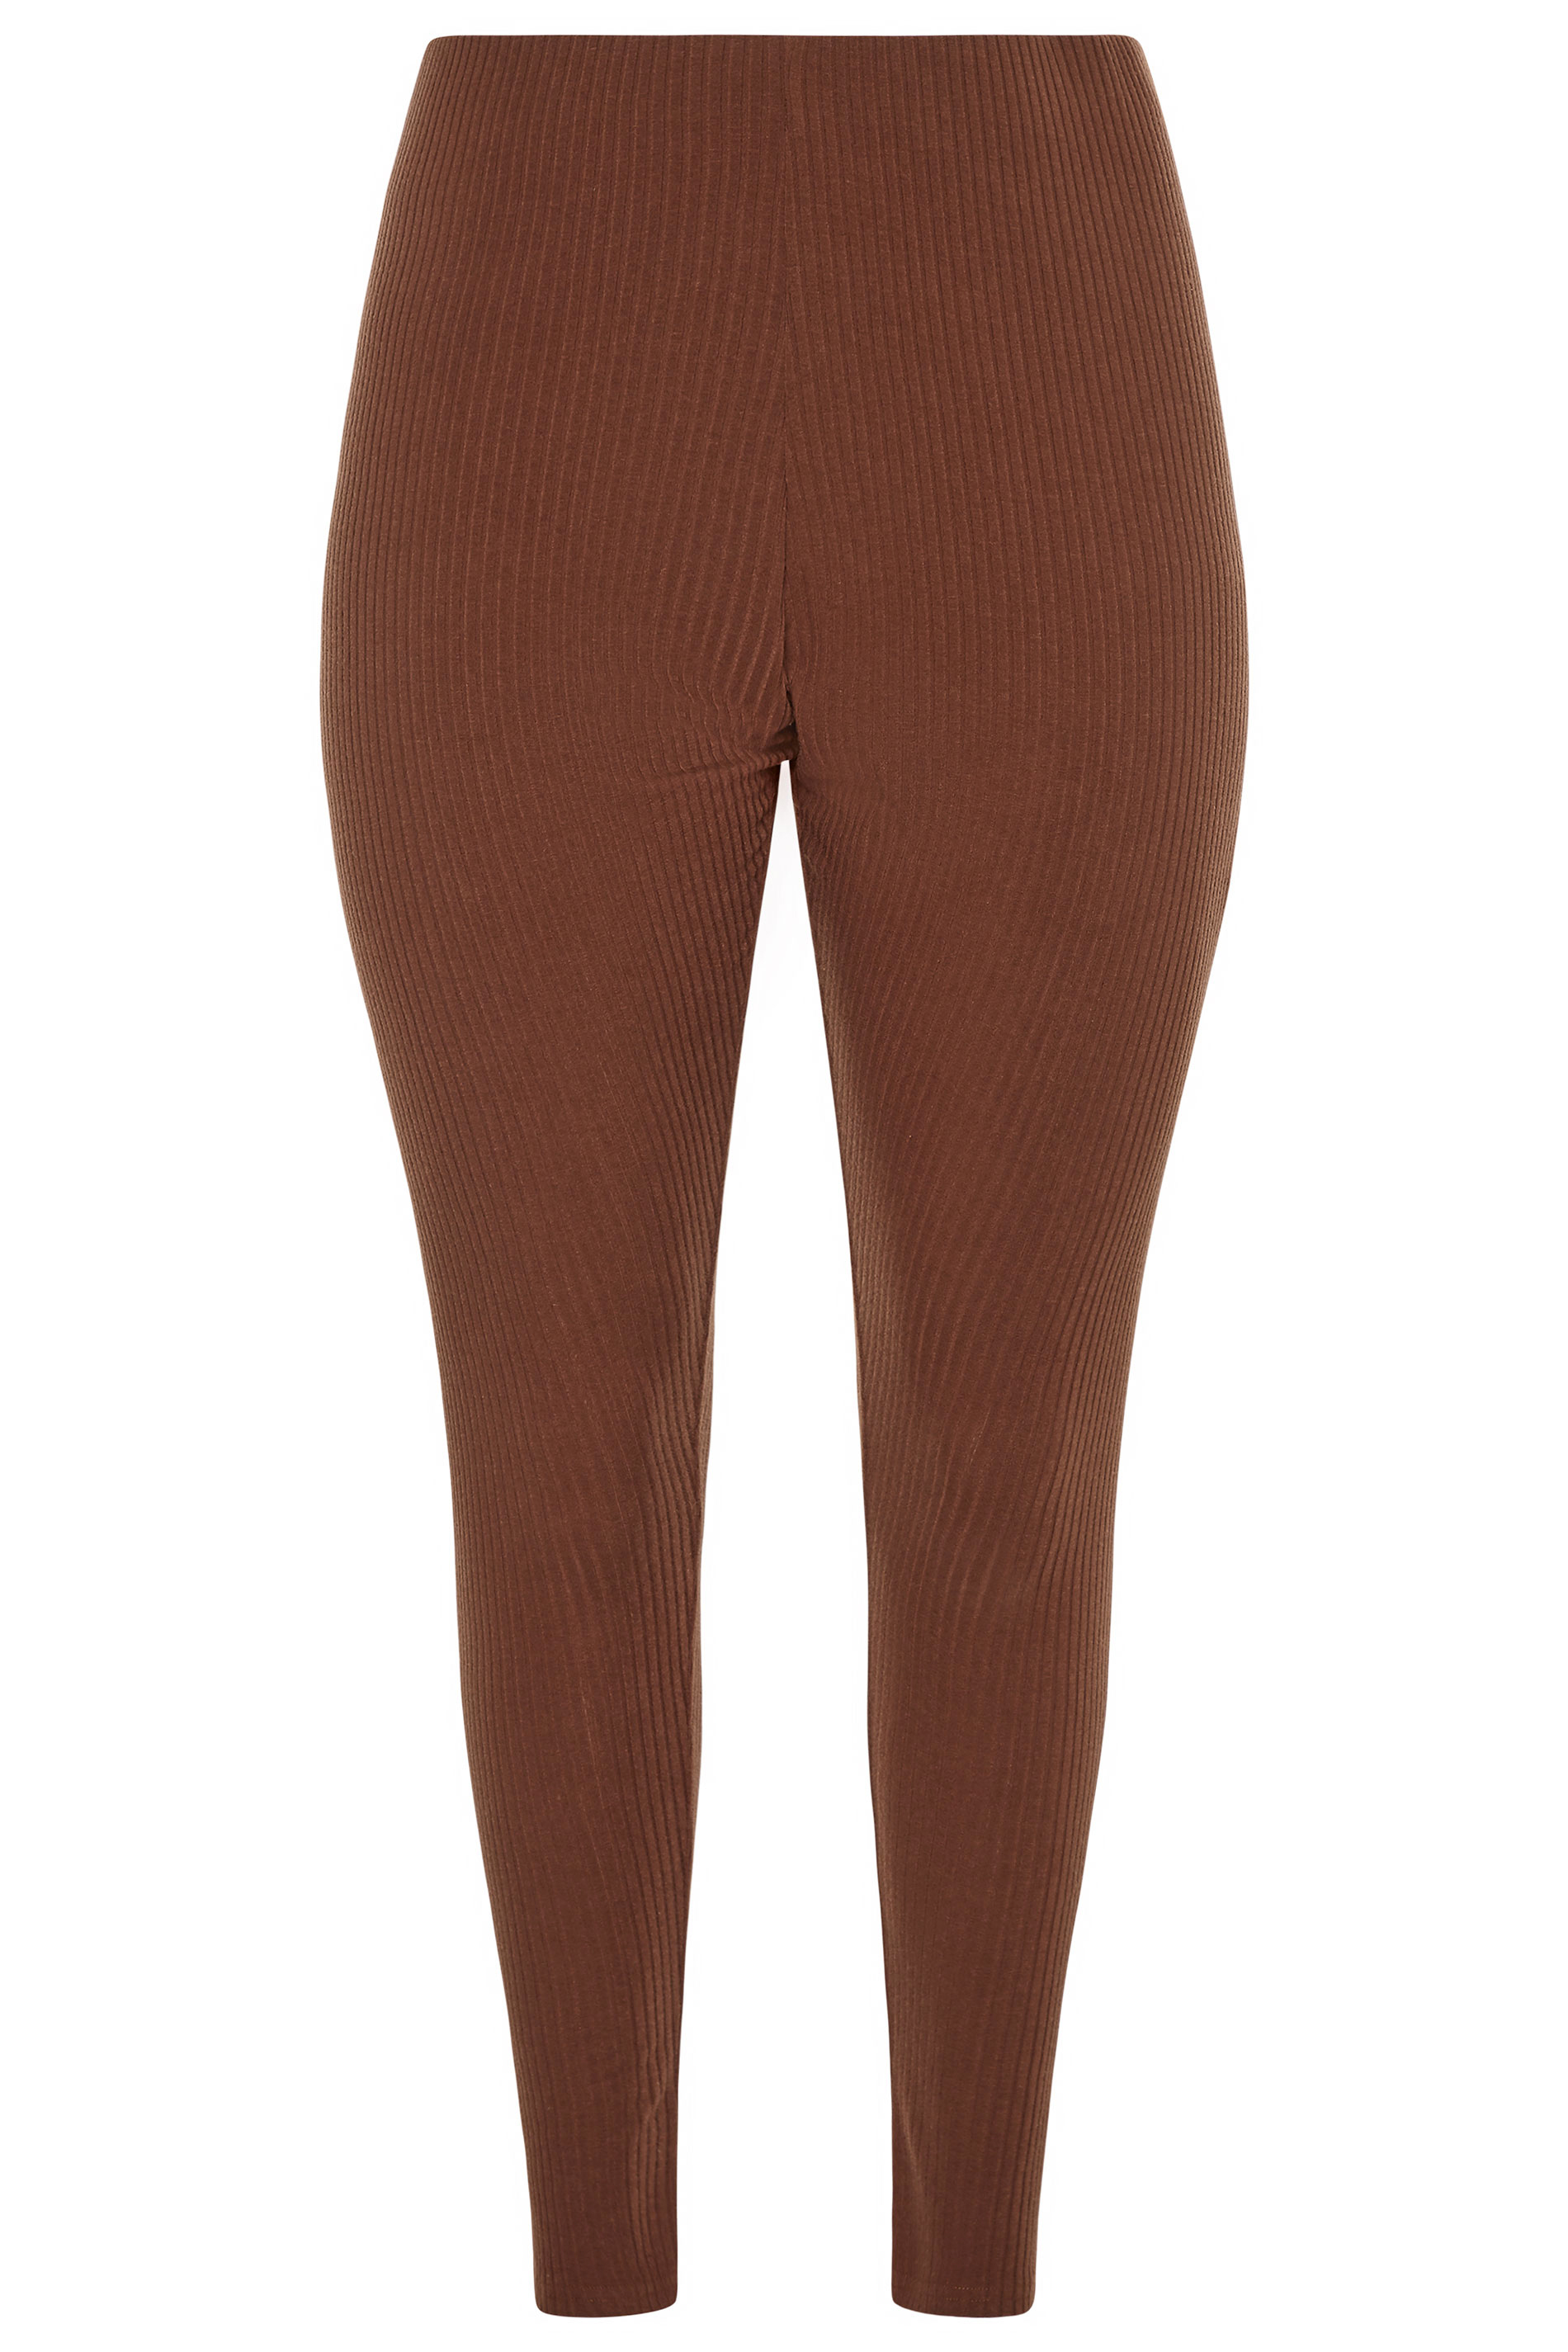 Brown Ribbed Leggings Co Ordinance  International Society of Precision  Agriculture